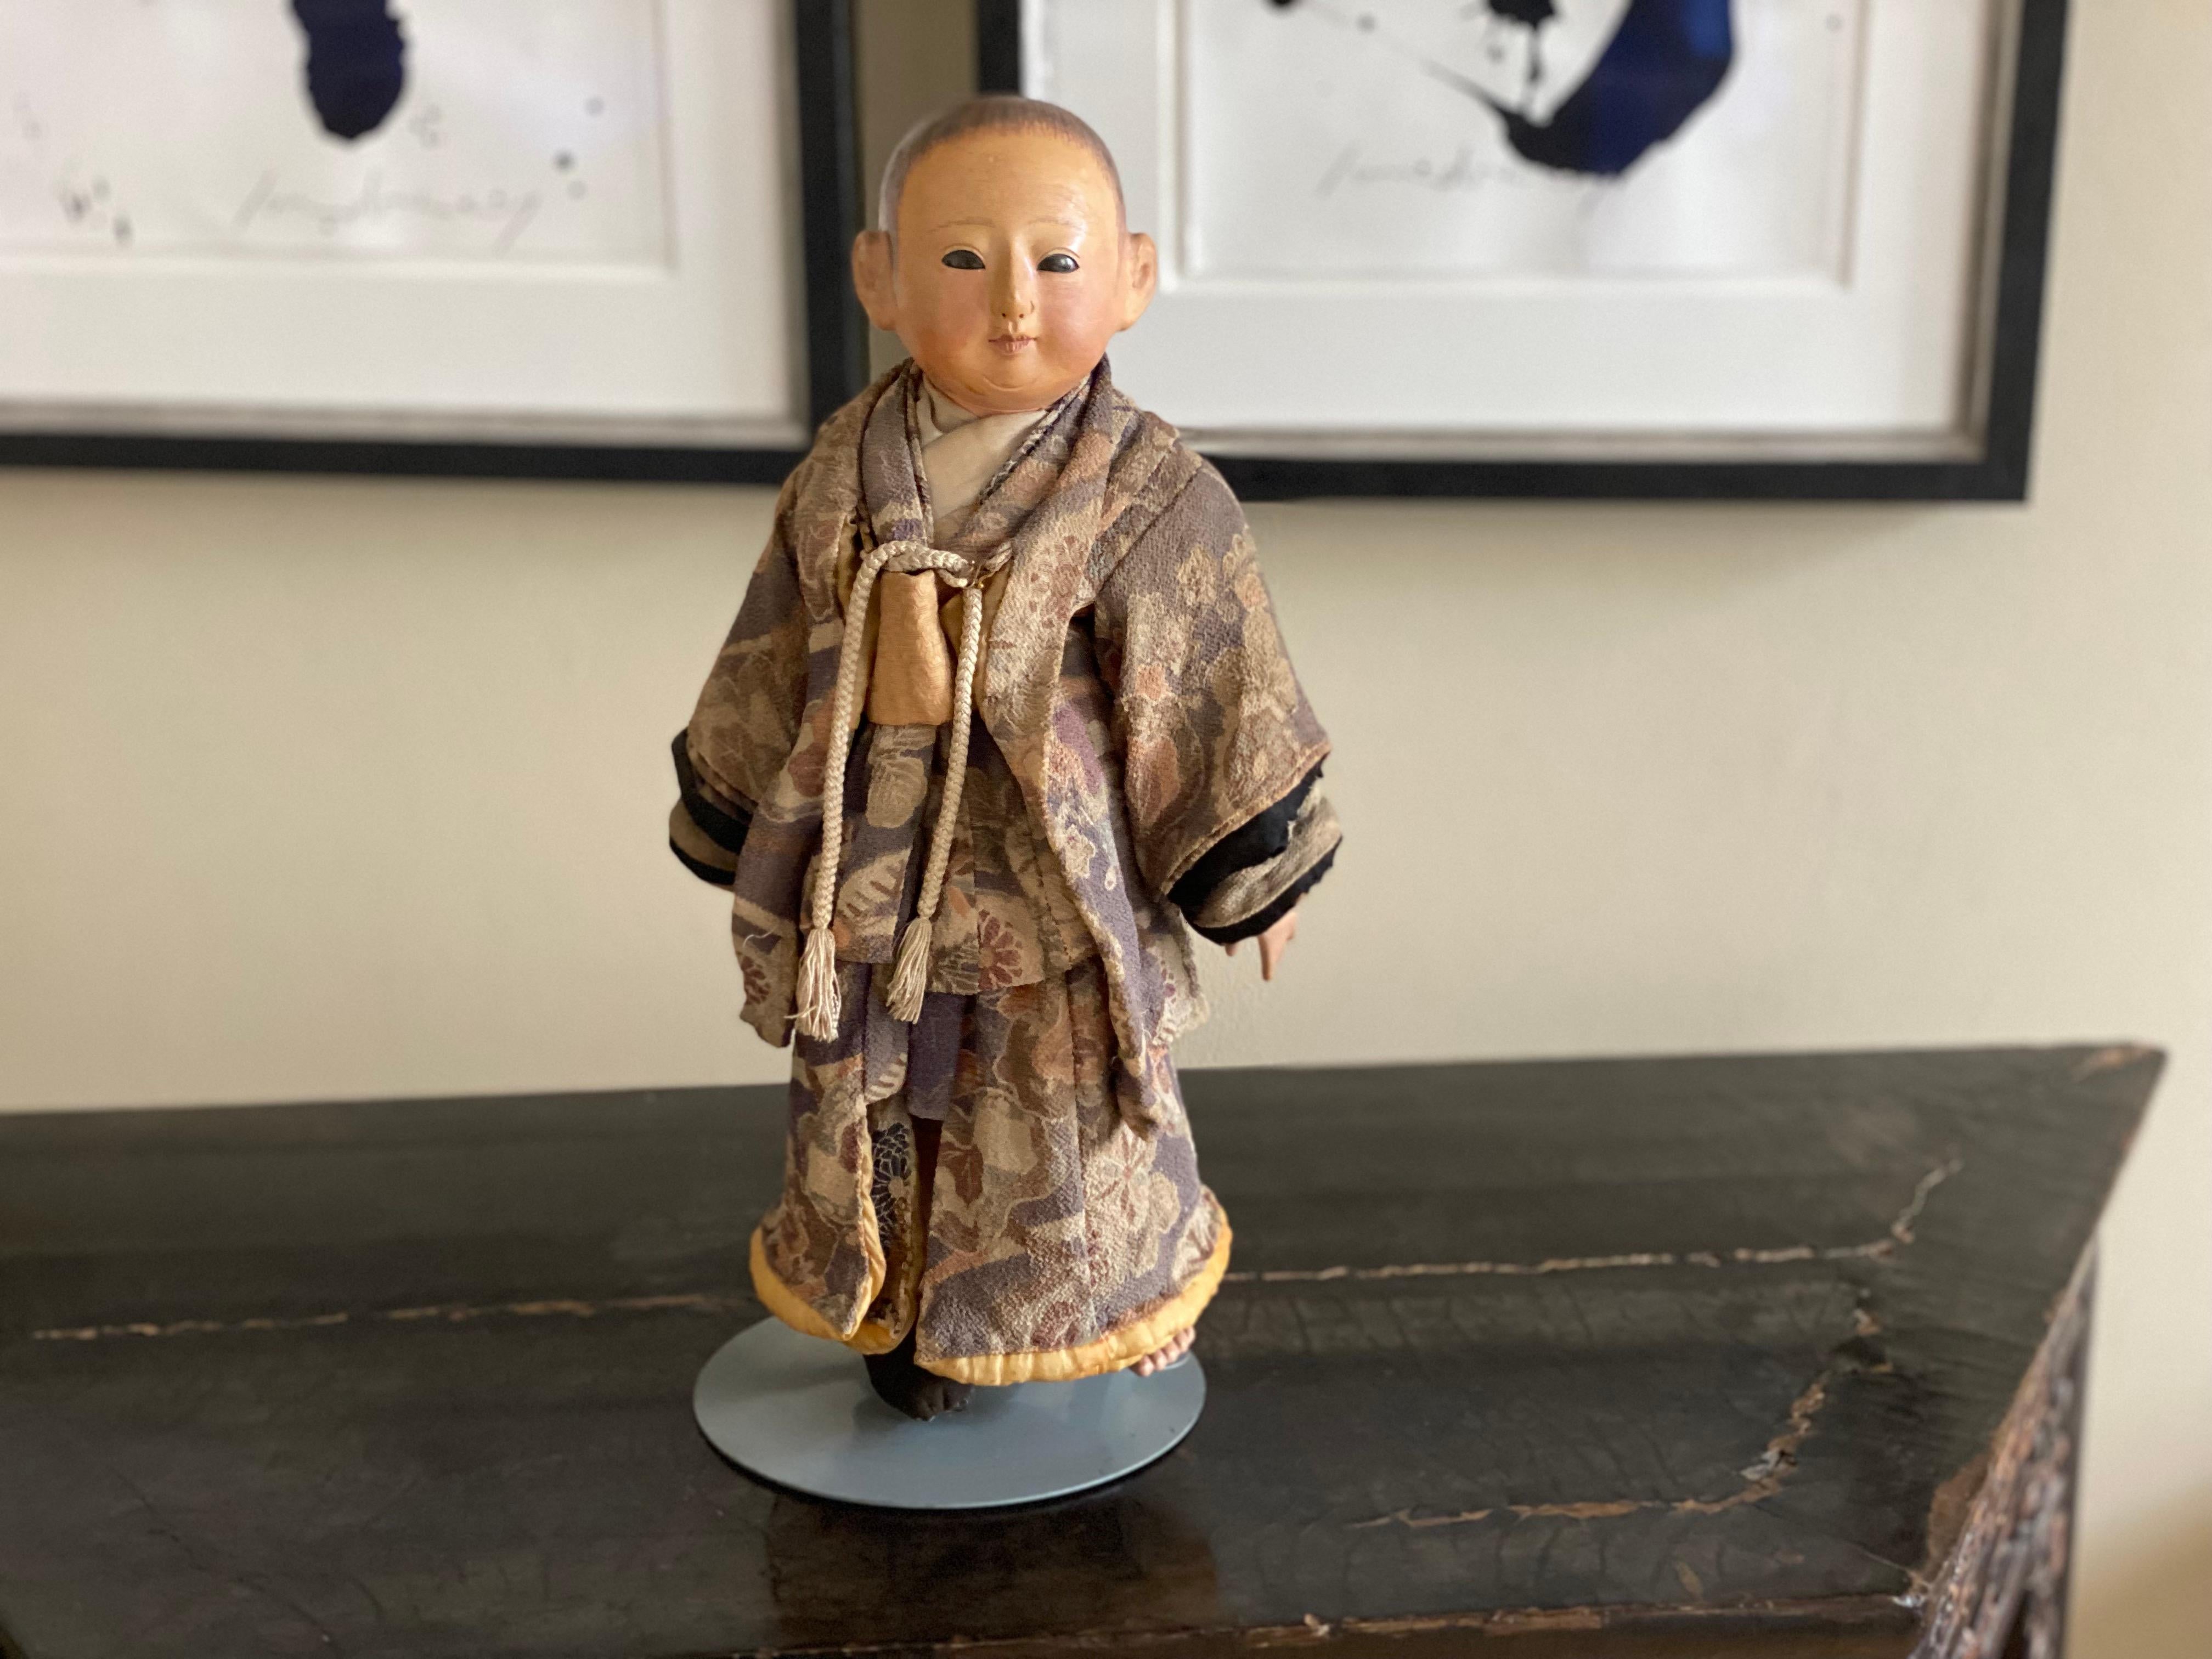 Ichimatsu Ningyo doll is a Japanese shell limestone doll from the Meiji period. The doll body as well as the head, forearms, hands, legs and feet are made of shell limestone, only the upper arms are made of fabric.

This little guy is just great,